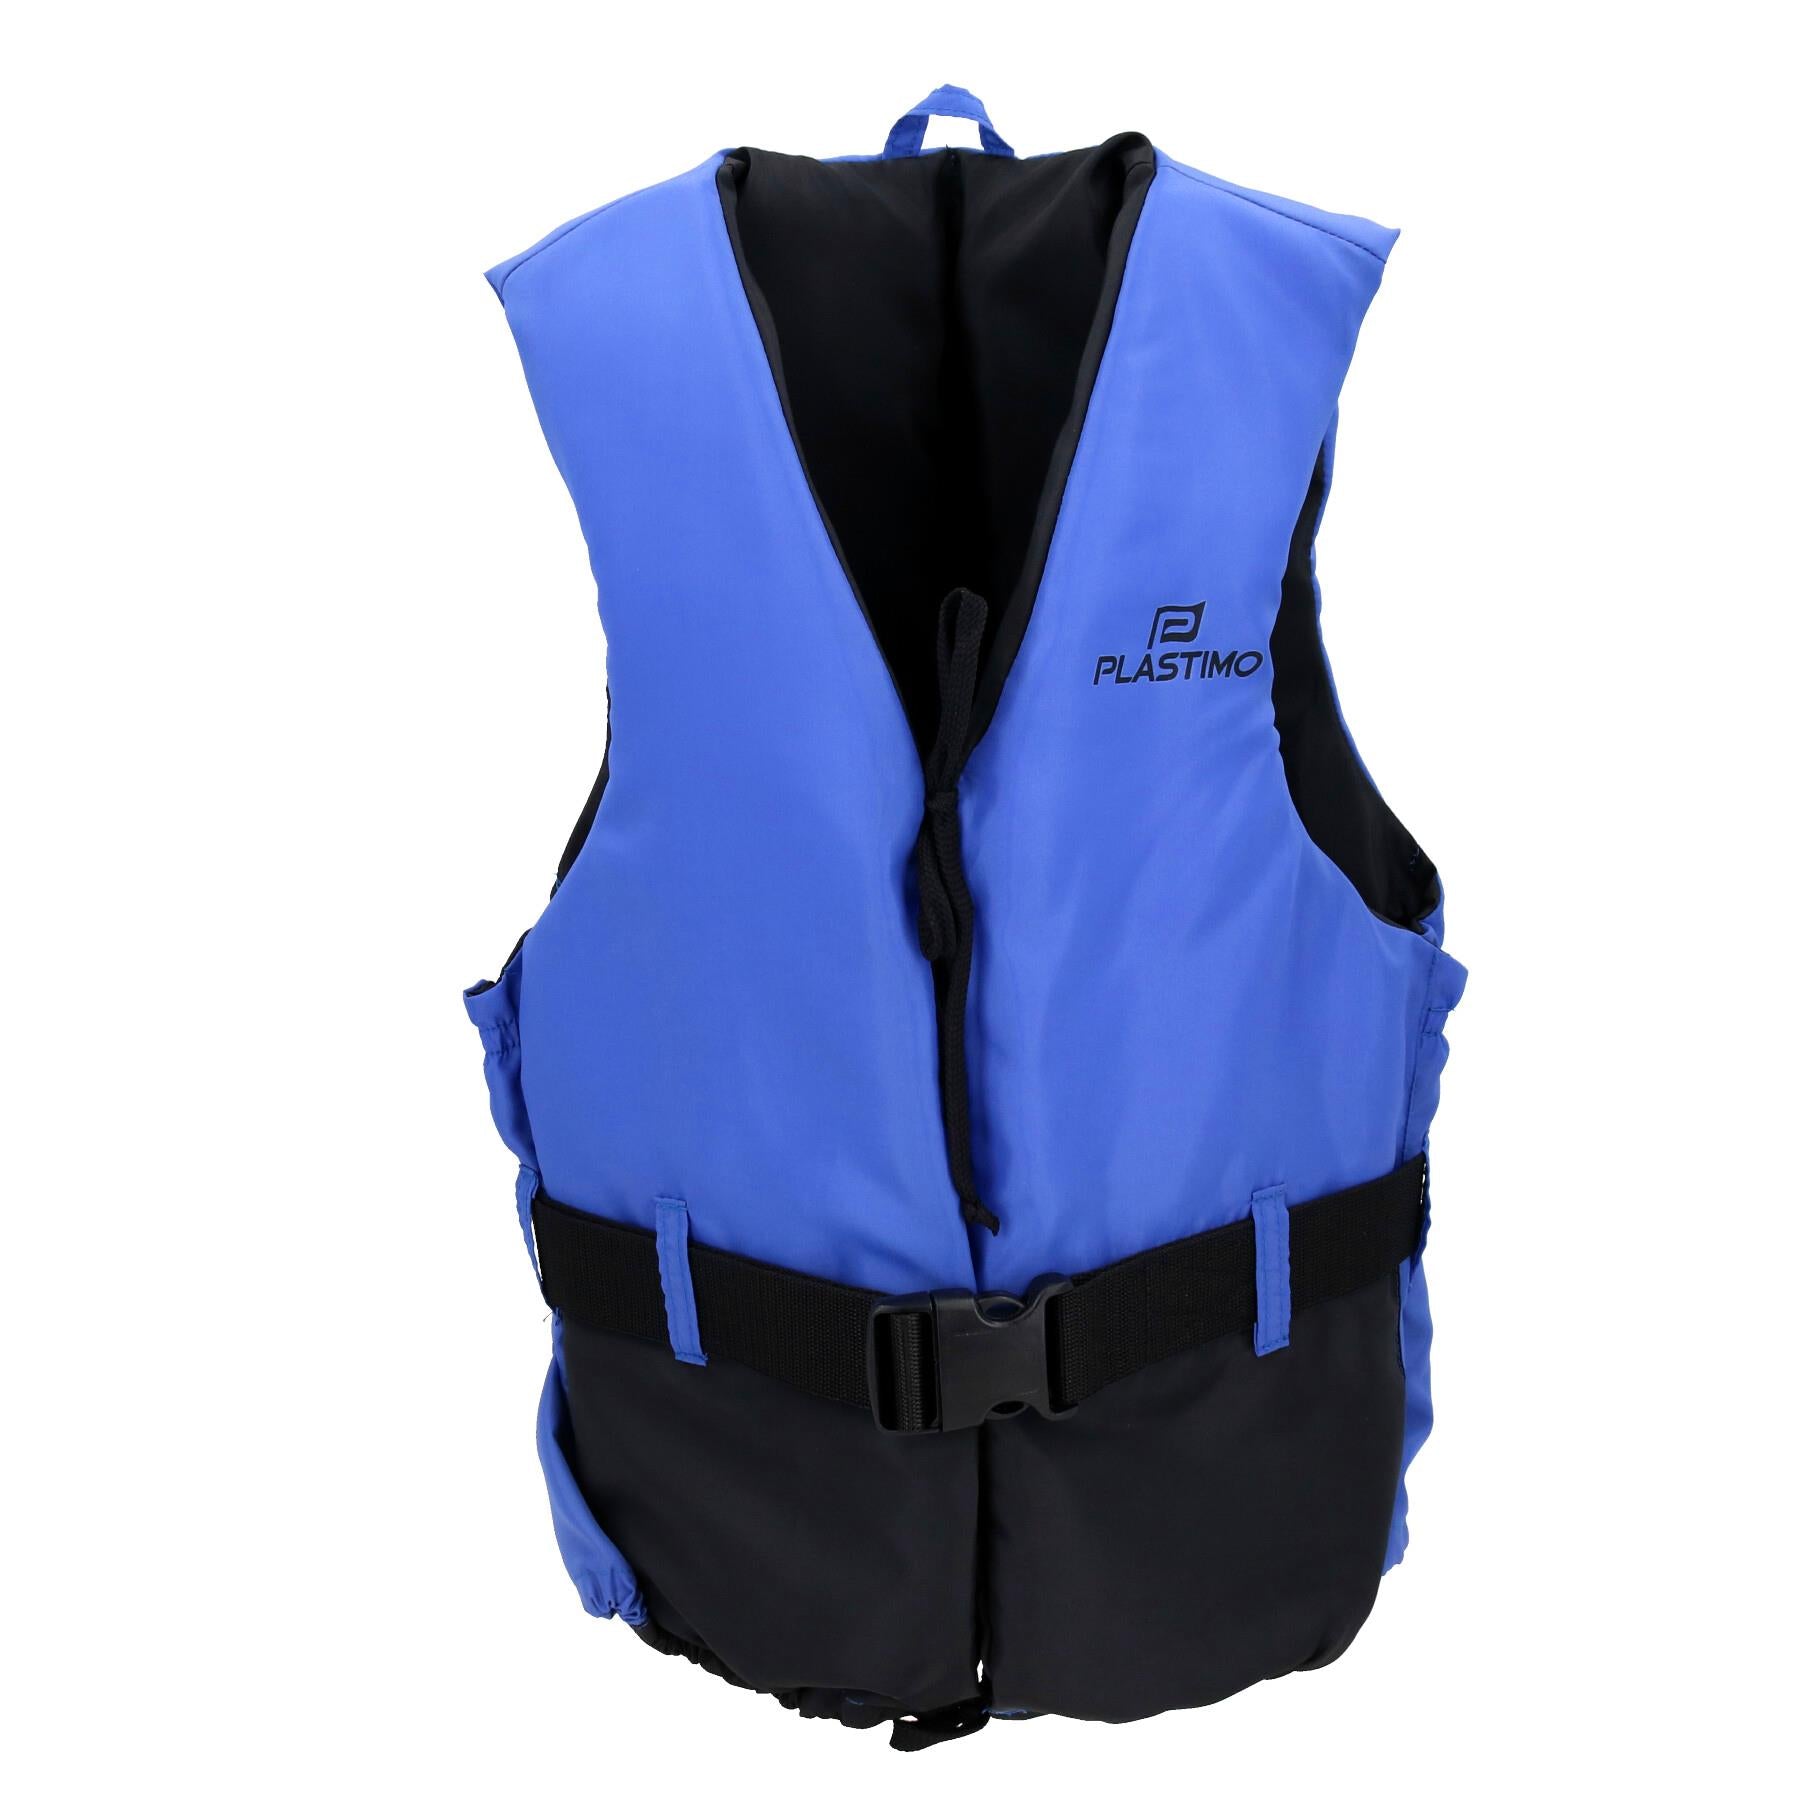 Small 30kg to 50kg Adult Buoyancy Aid Plastimo Olympia 50N Personal Floatation Jacket Device